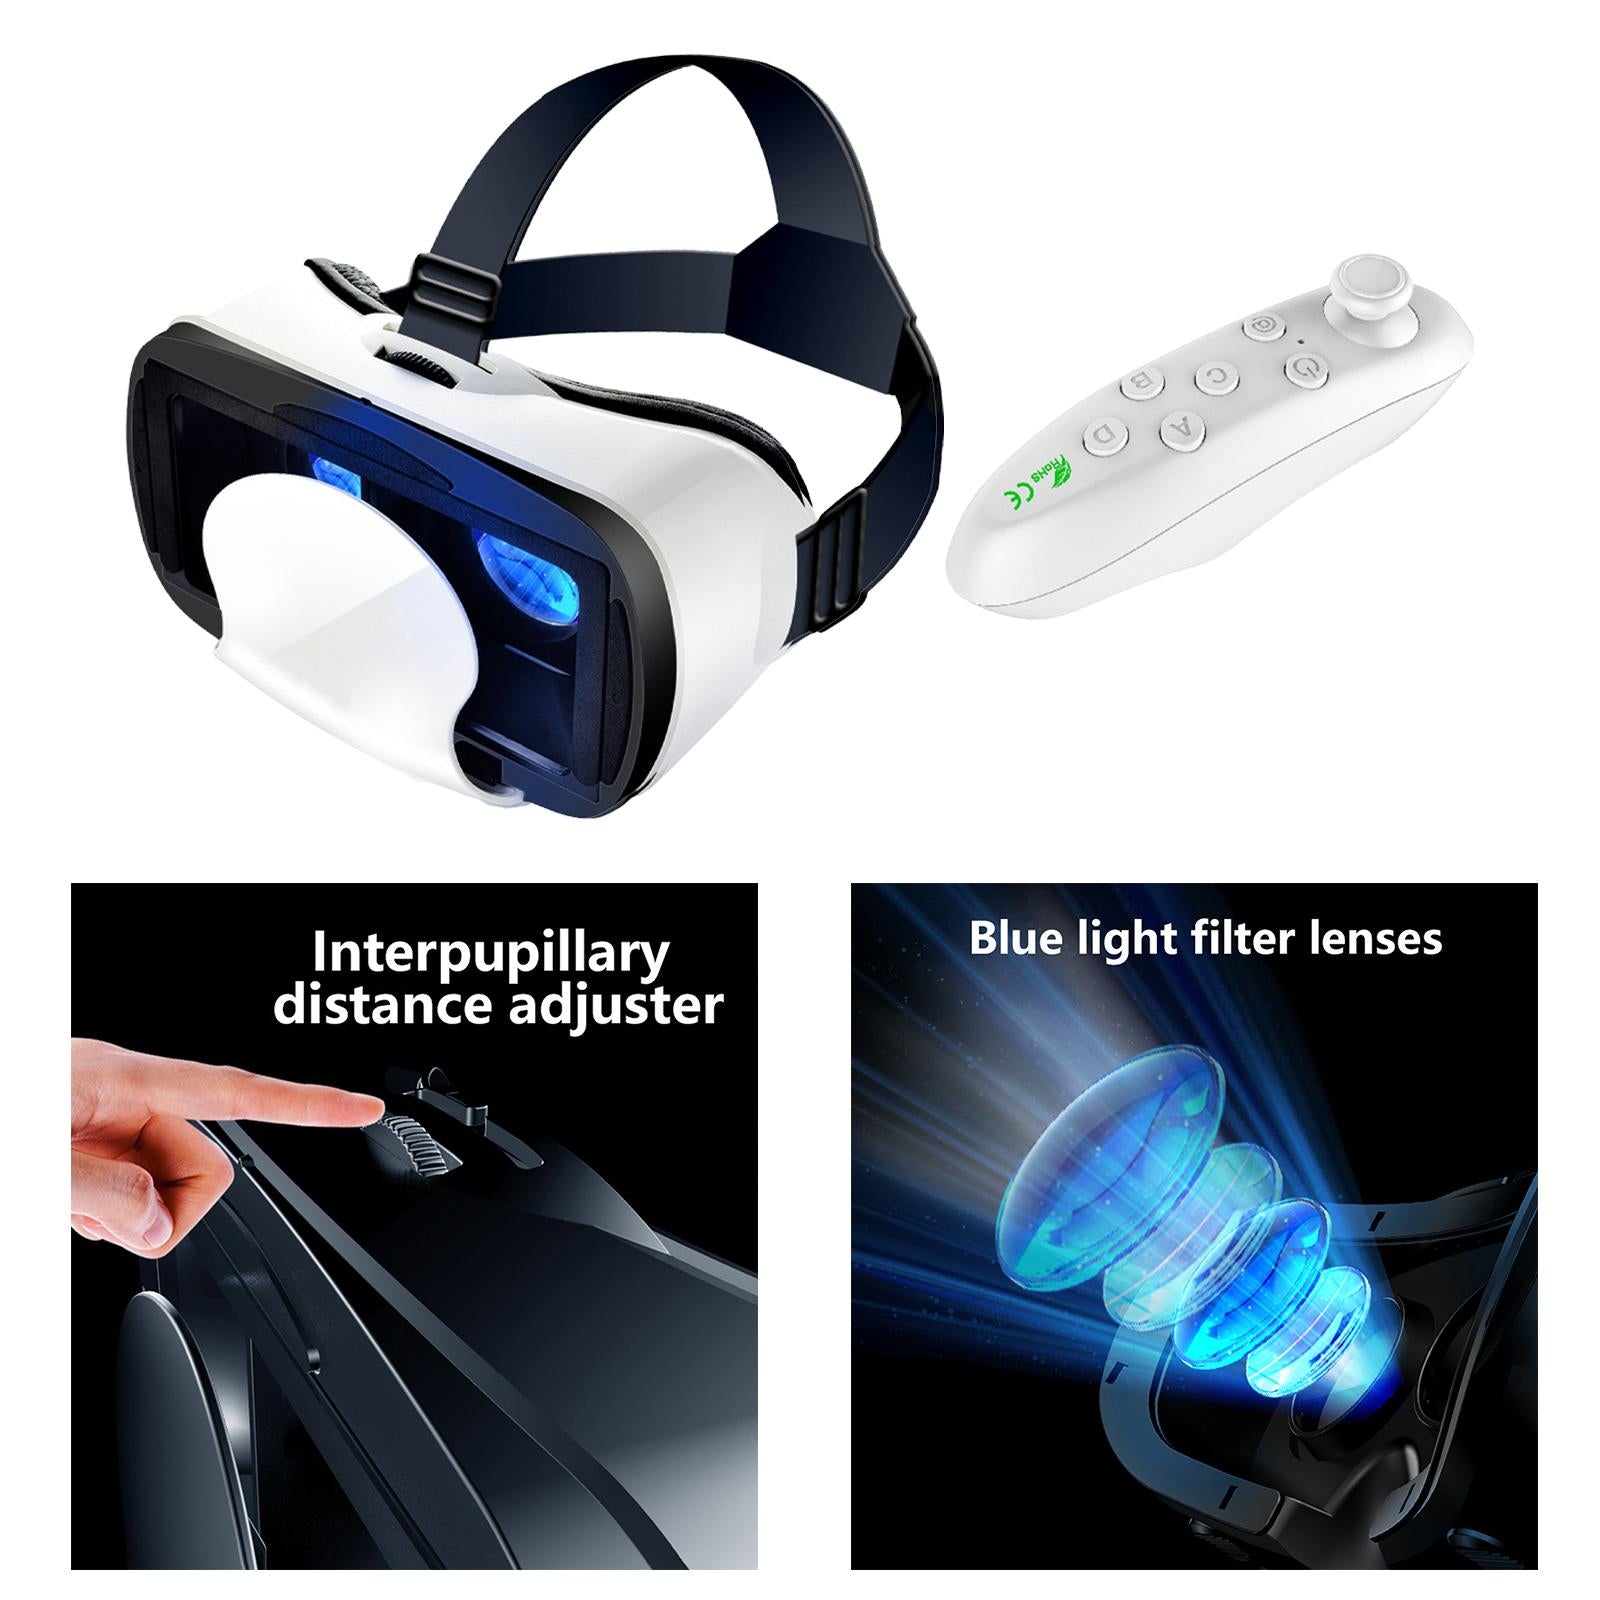 VR Headset Adjustable Blue Light protected Universal for Mobile Games with Controller